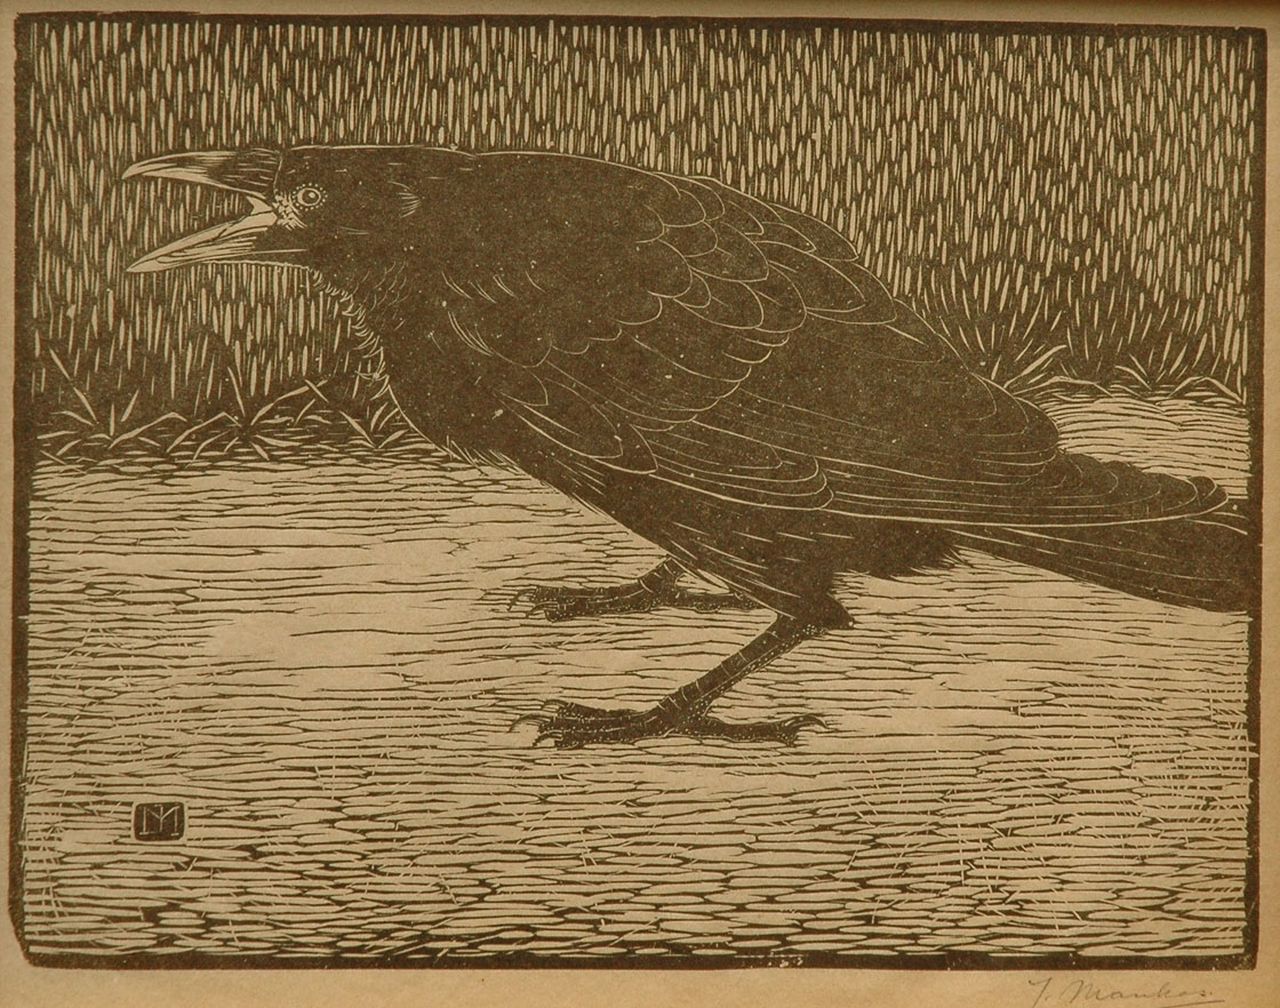 Mankes J.  | Jan Mankes, A screaming crow, woodcut on Japanese paper 18.3 x 23.8 cm, signed with mon. in the block and l.r. in full (in pencil and executed 1918